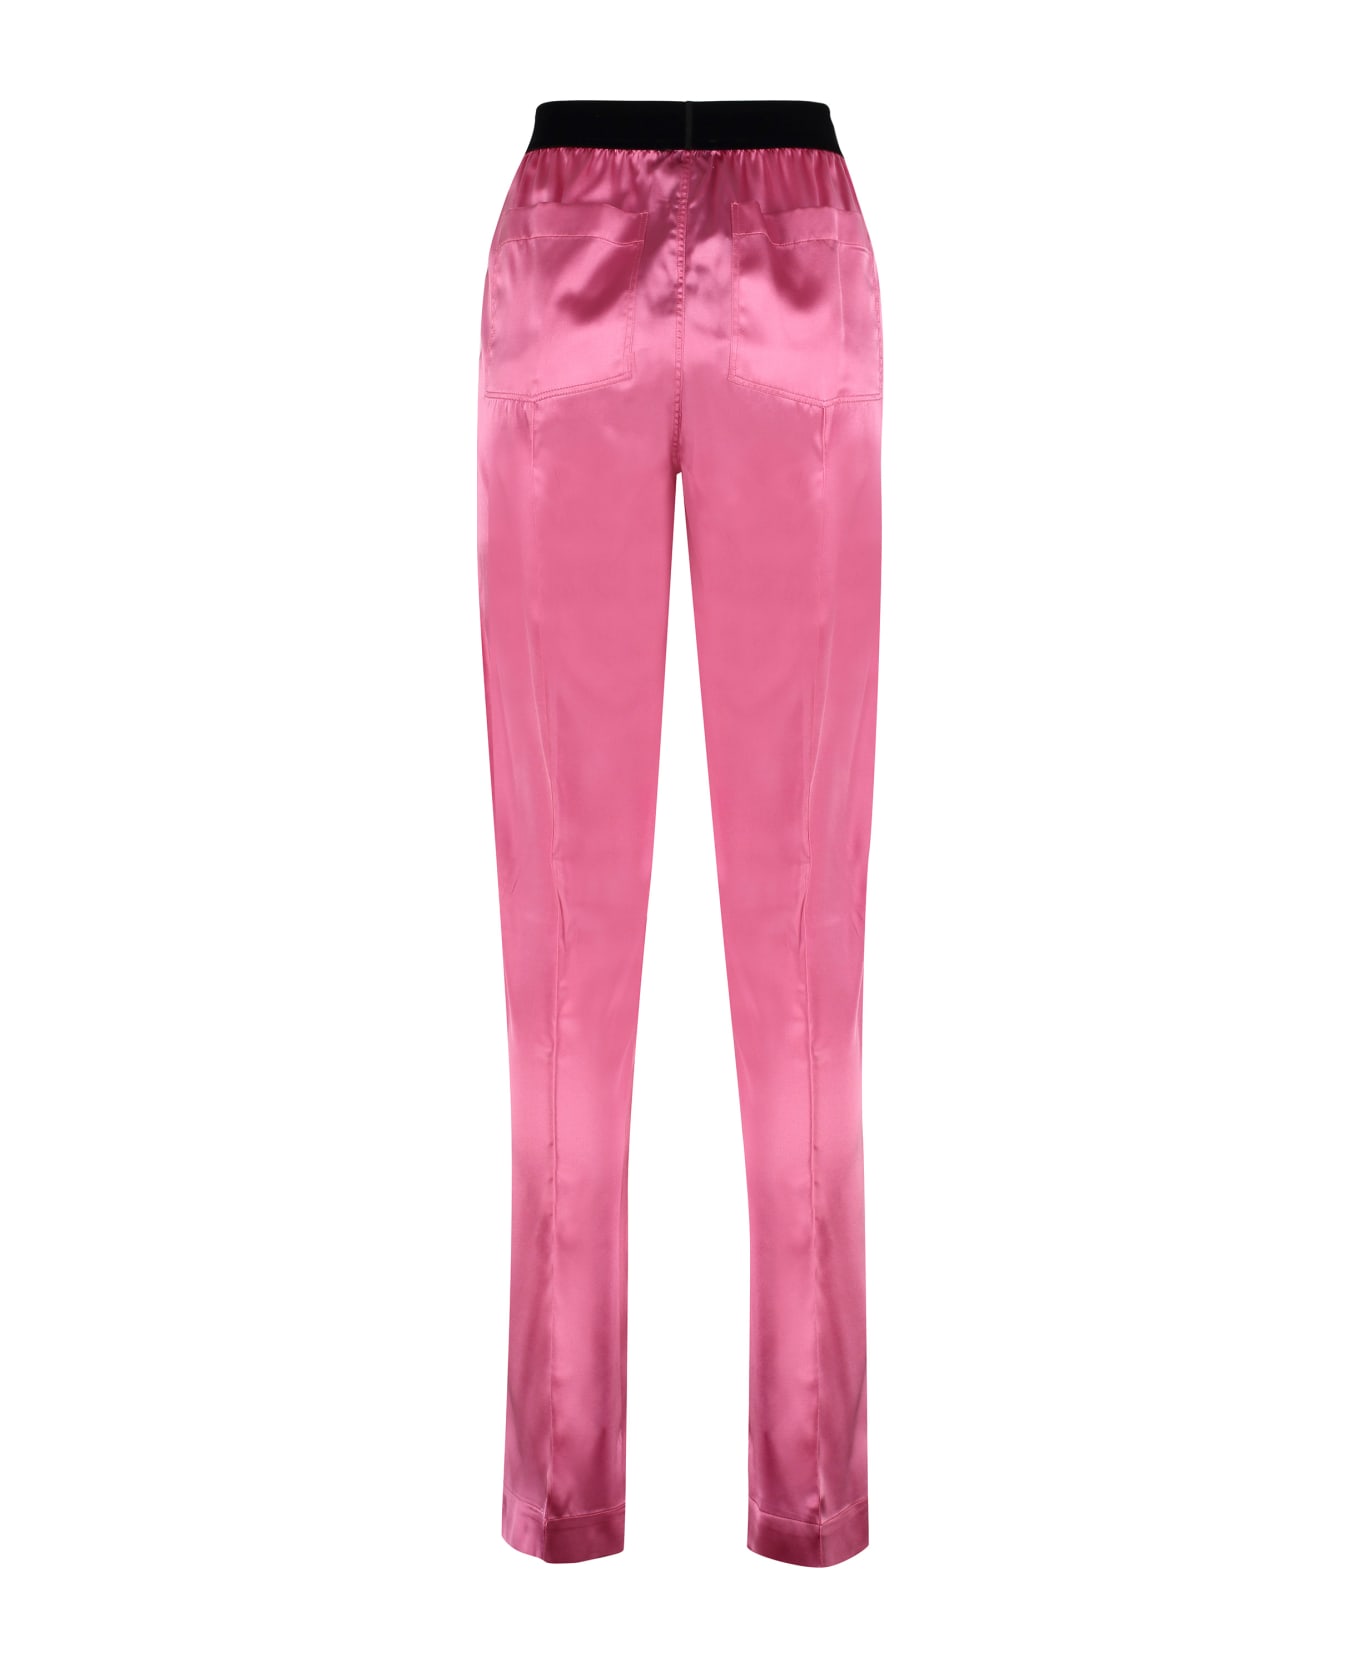 Tom Ford Satin Trousers - Pink